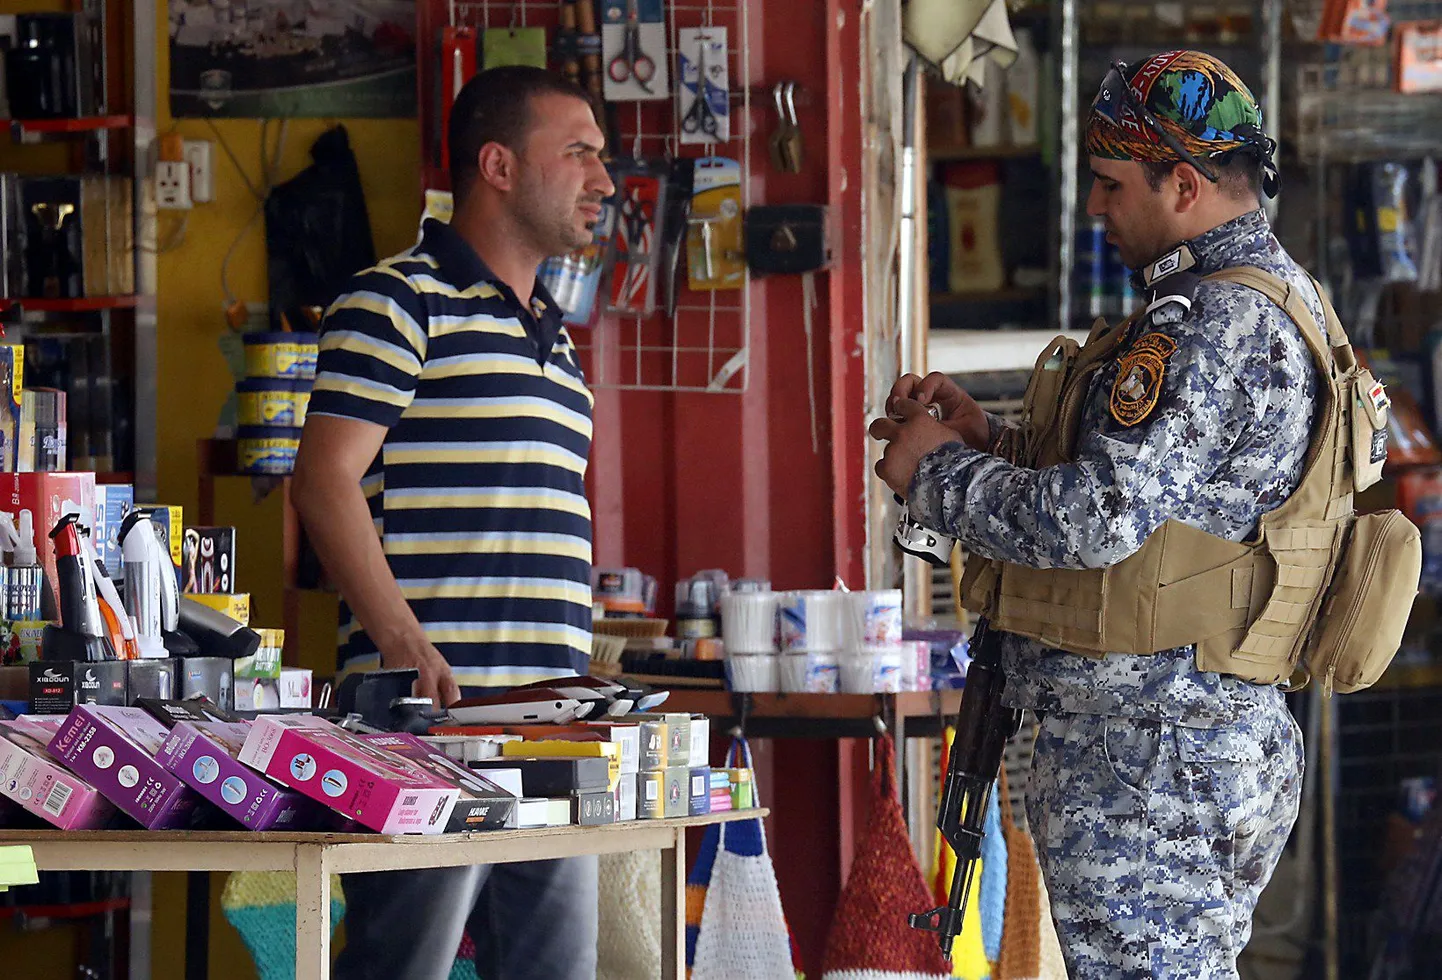 A member of the Iraqi security forces check an item at a shop in central Baghdad on June 19, 2014, as fighting reaches the northern approaches to the Iraqi capital following a lightning assault launched by Sunni Muslim insurgents on June 9 in which they have captured Mosul, a city of two million people, and a big chunk of mainly Sunni Arab territory stretching south towards Baghdad. AFP PHOTO/SABAH ARAR